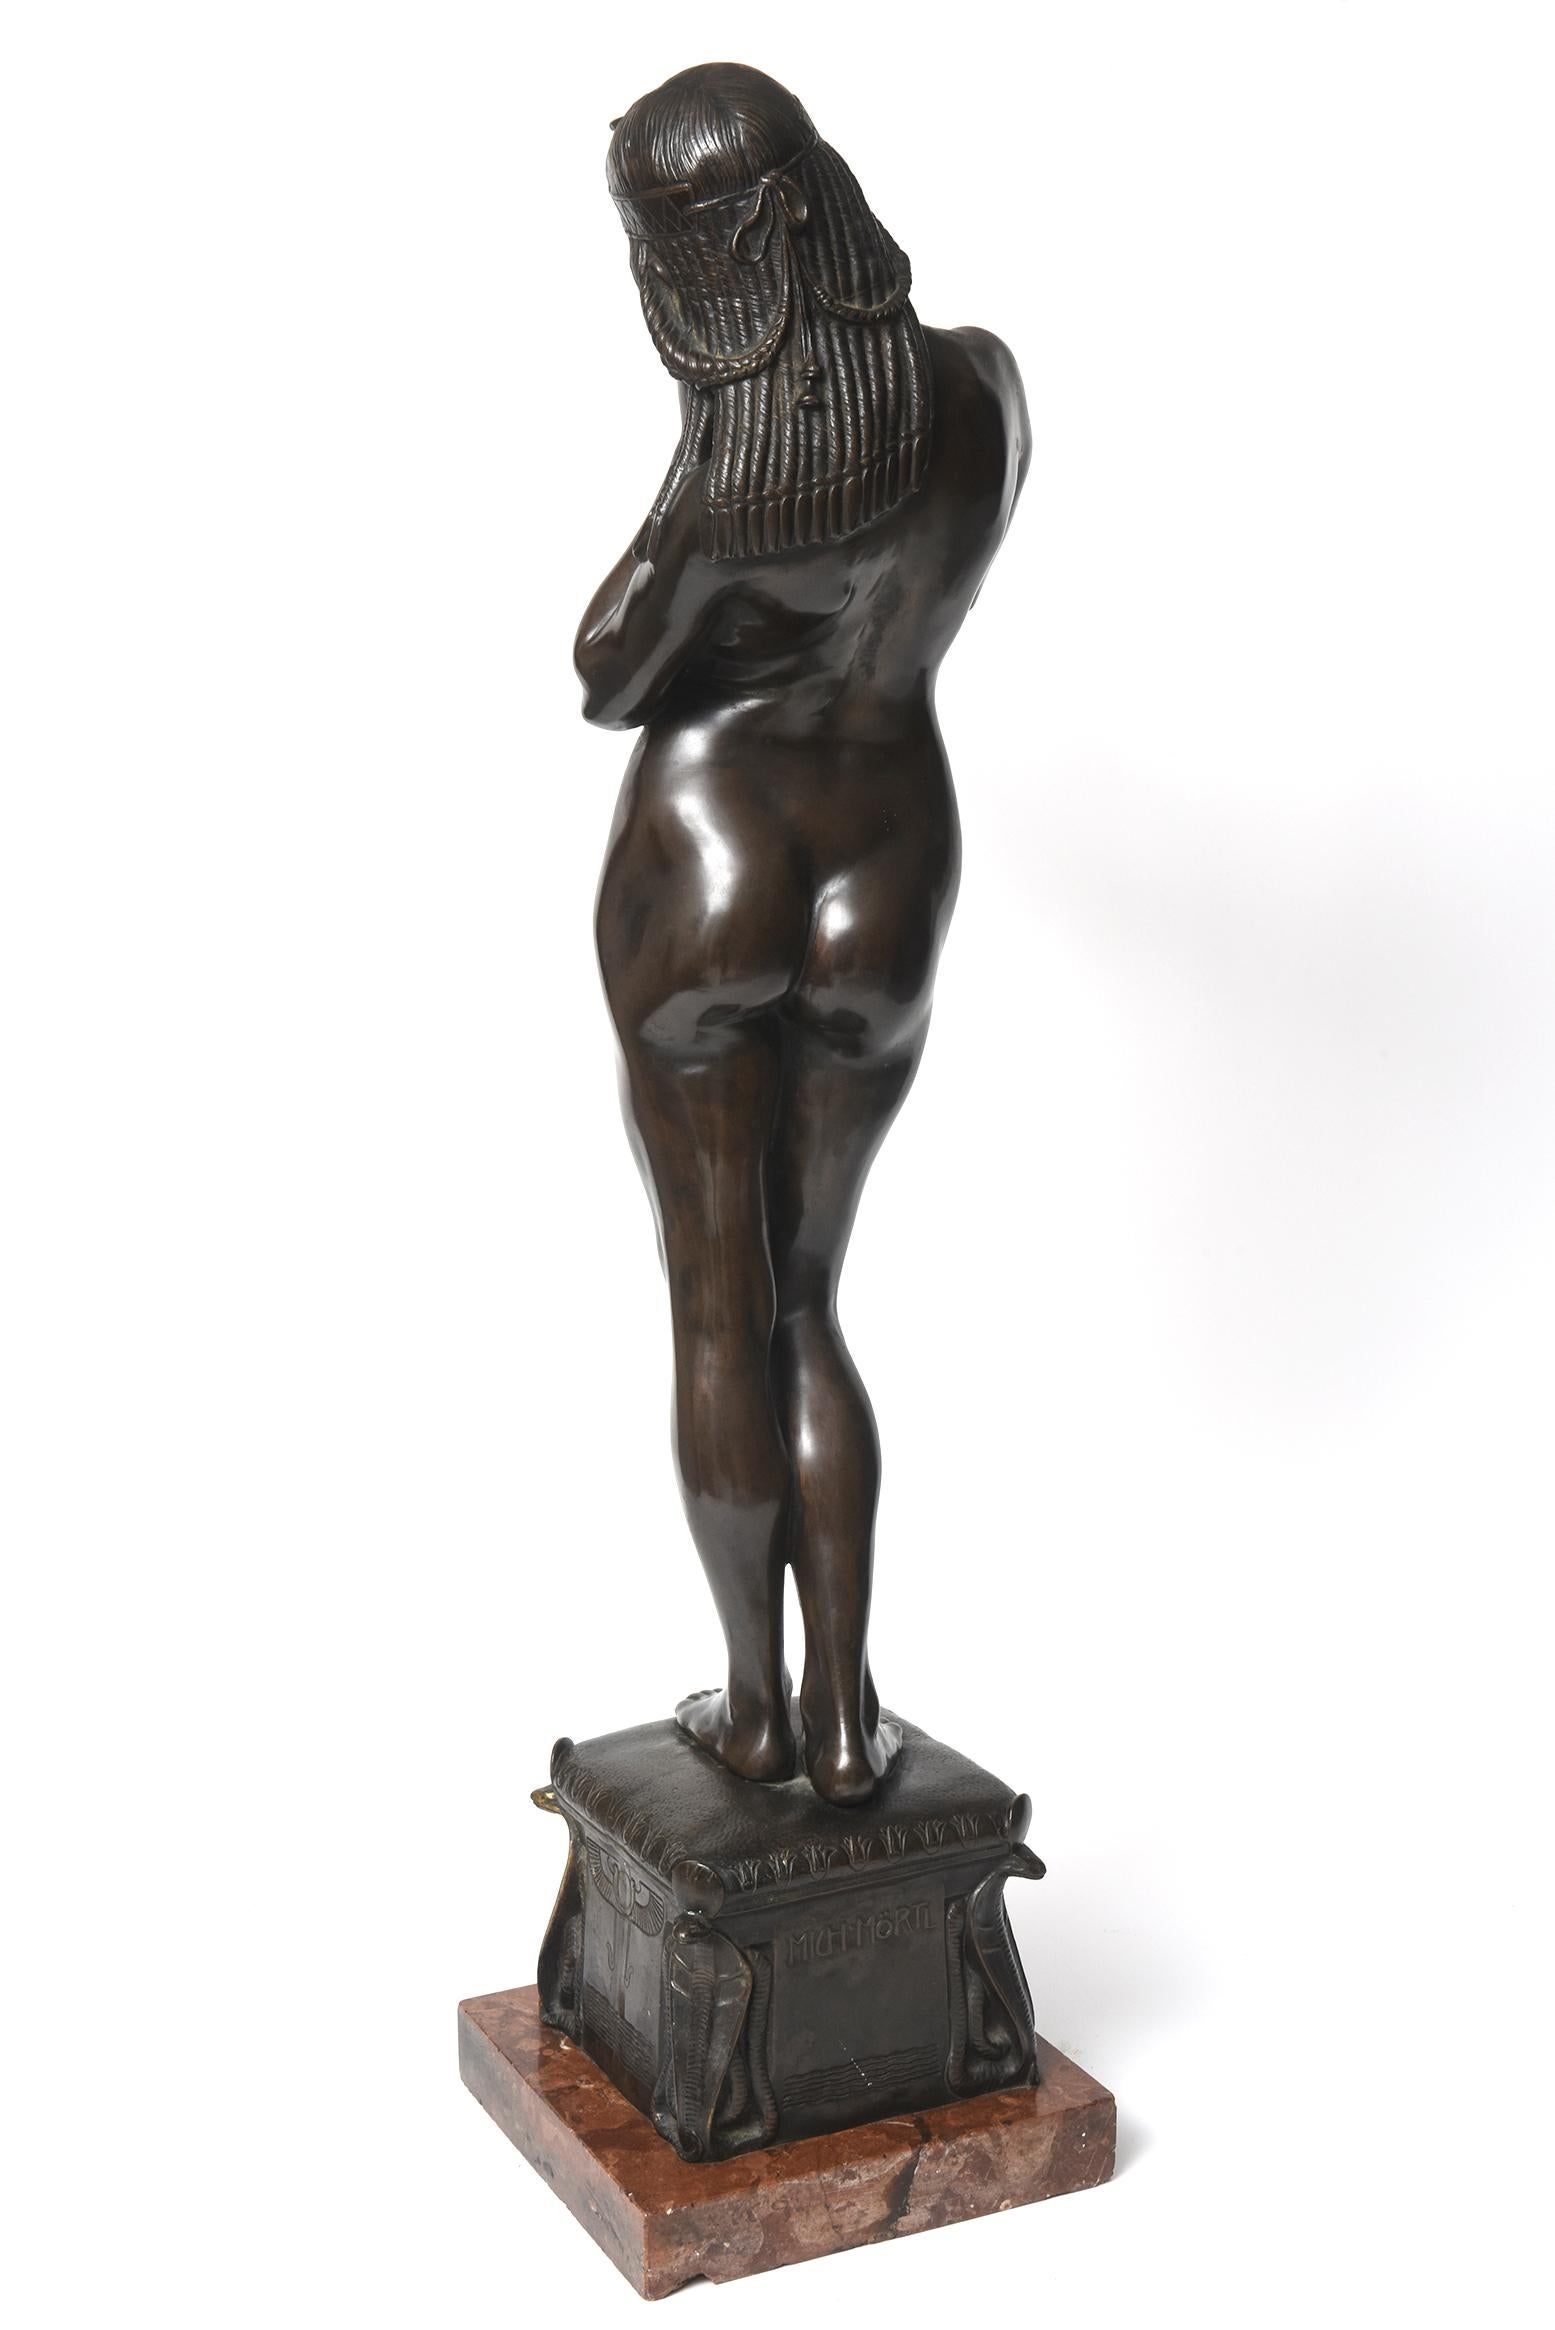 Austrian Large Egyptian Nude Woman Bronze Sculpture of Cleopatra by Michael Mörtl